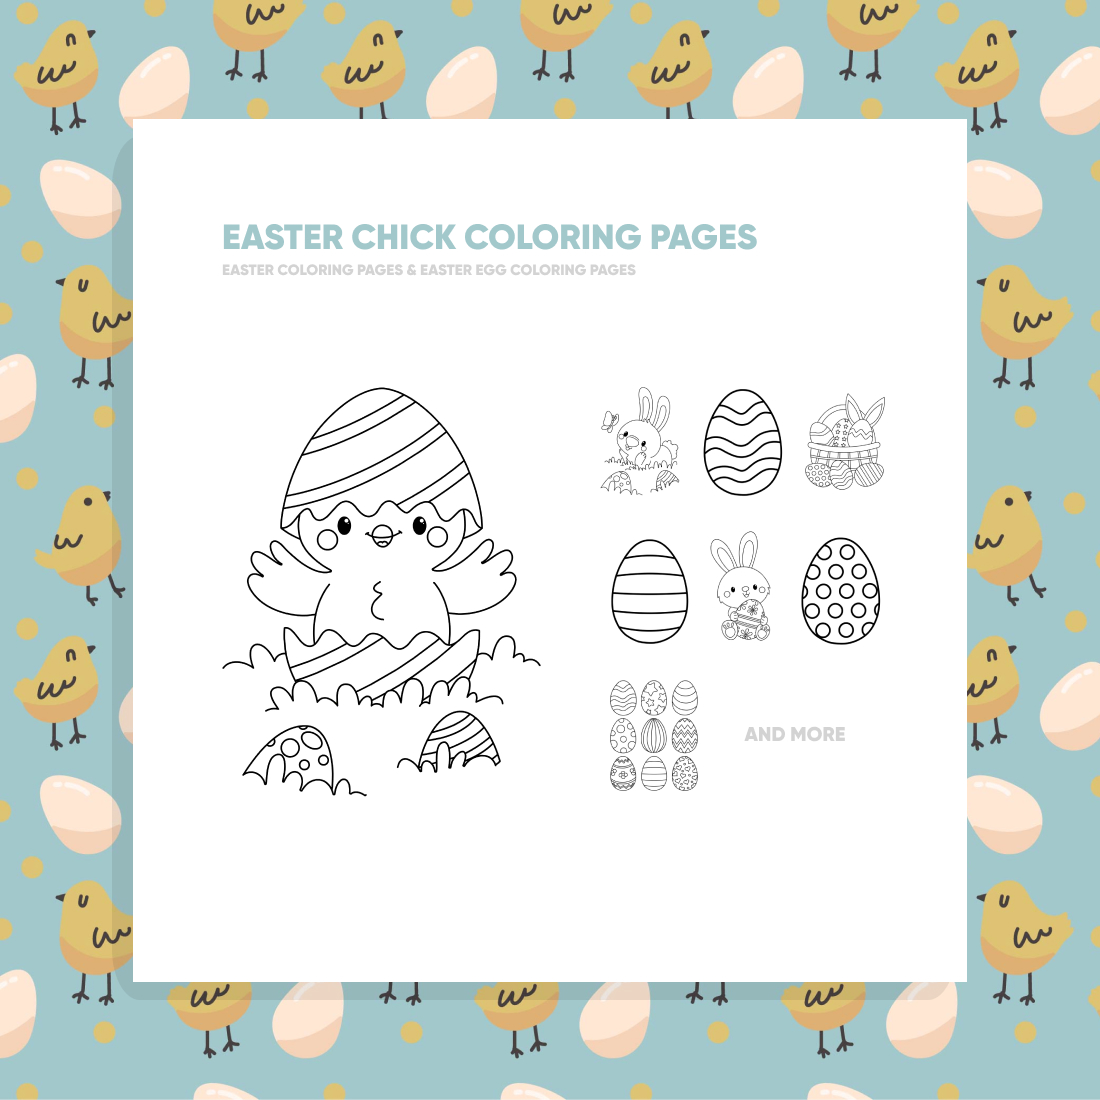 Easter Chick Coloring Pages facebook cover.